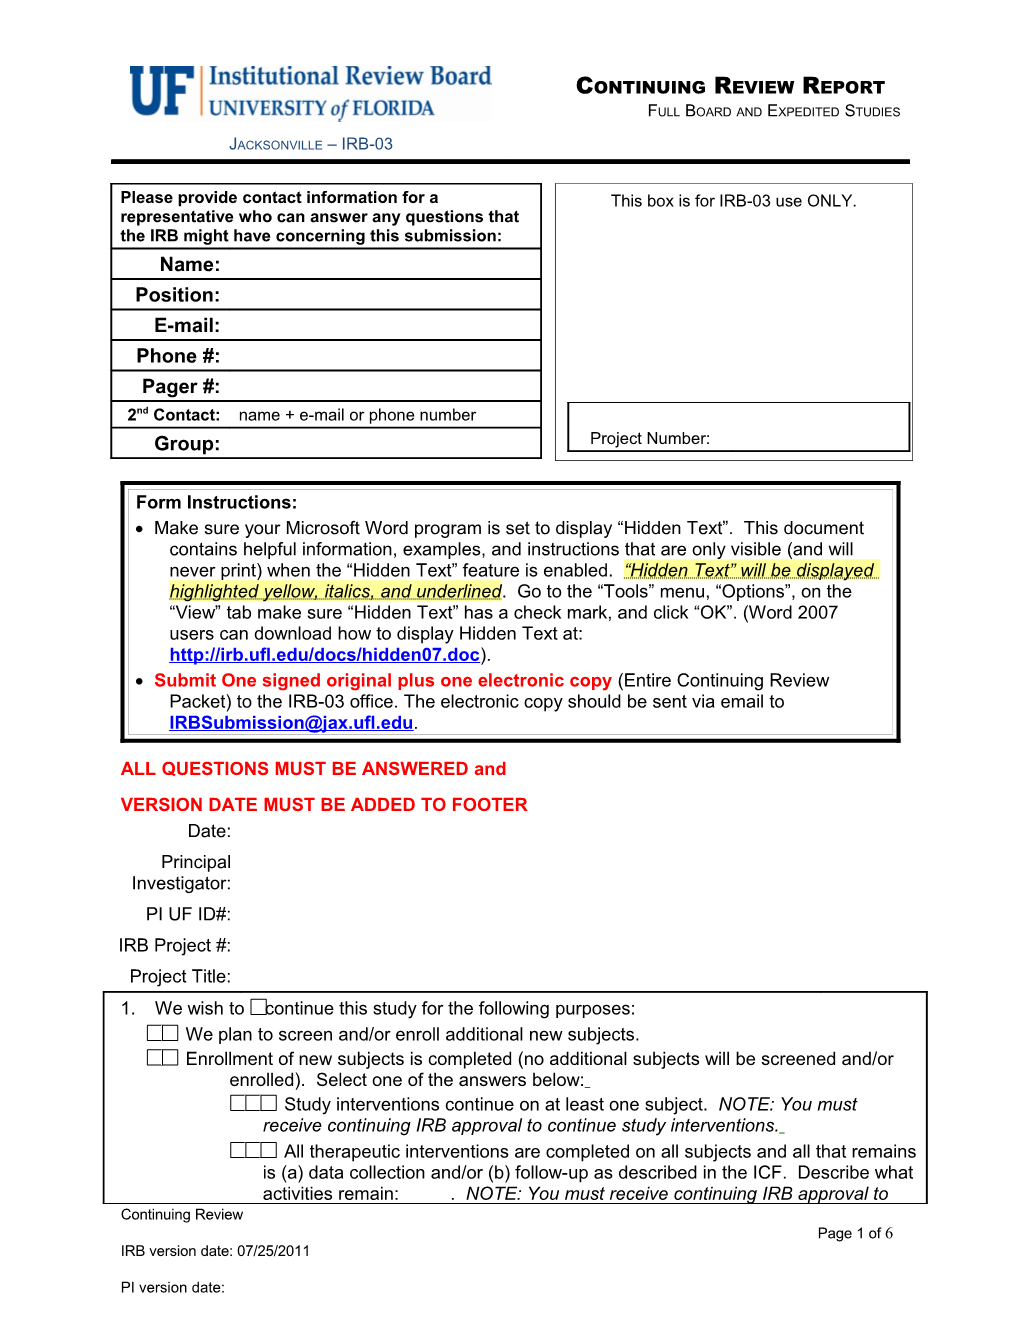 Continuing Review / Study Closure Information Form